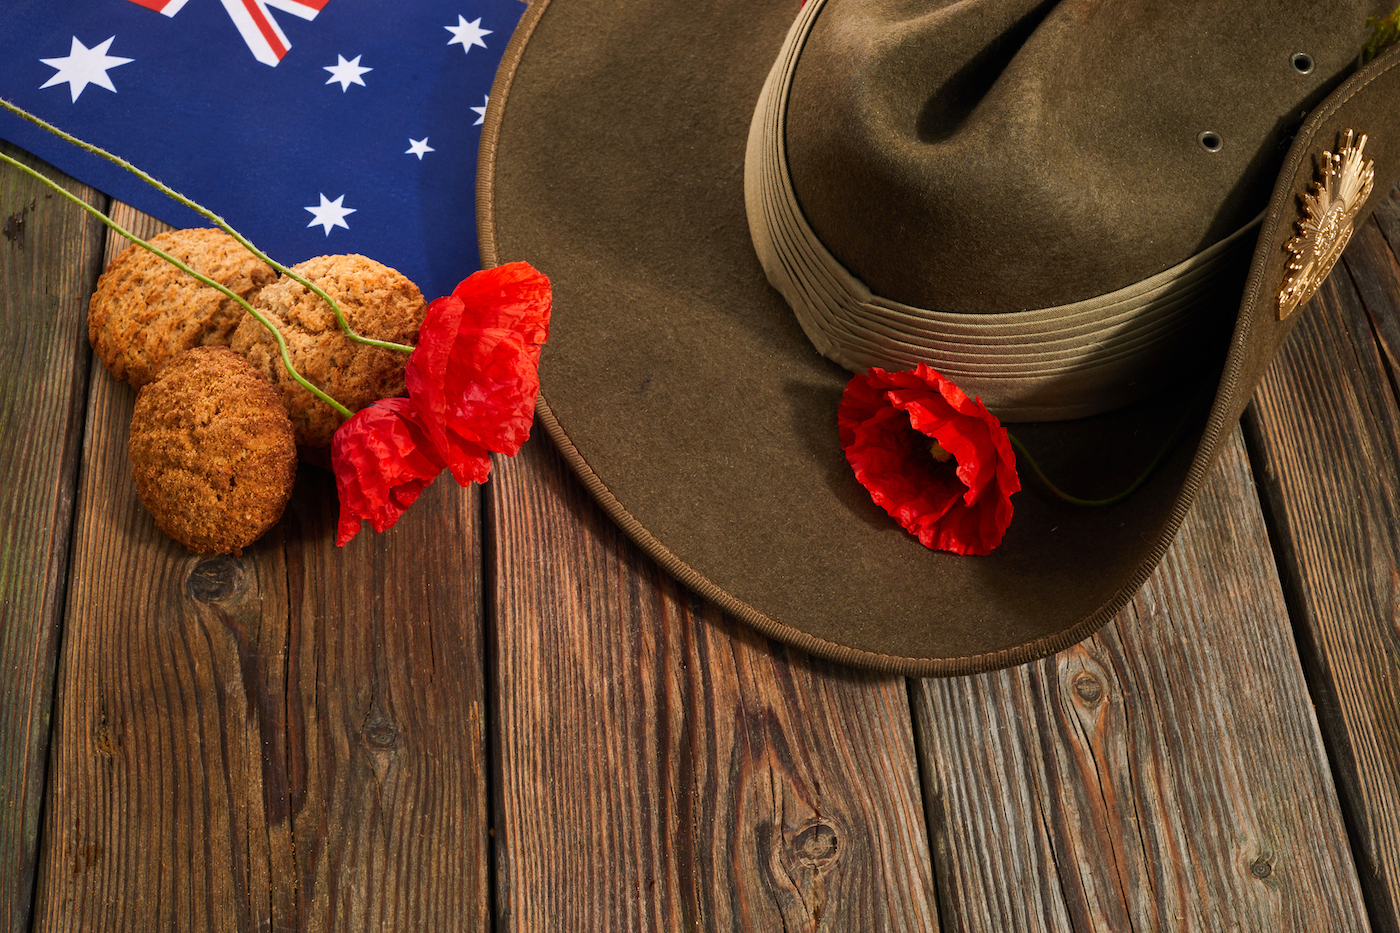 Australian Anzac Day. Australian army slouch hat red poppy and traditional Anzac biscuits on wooden background